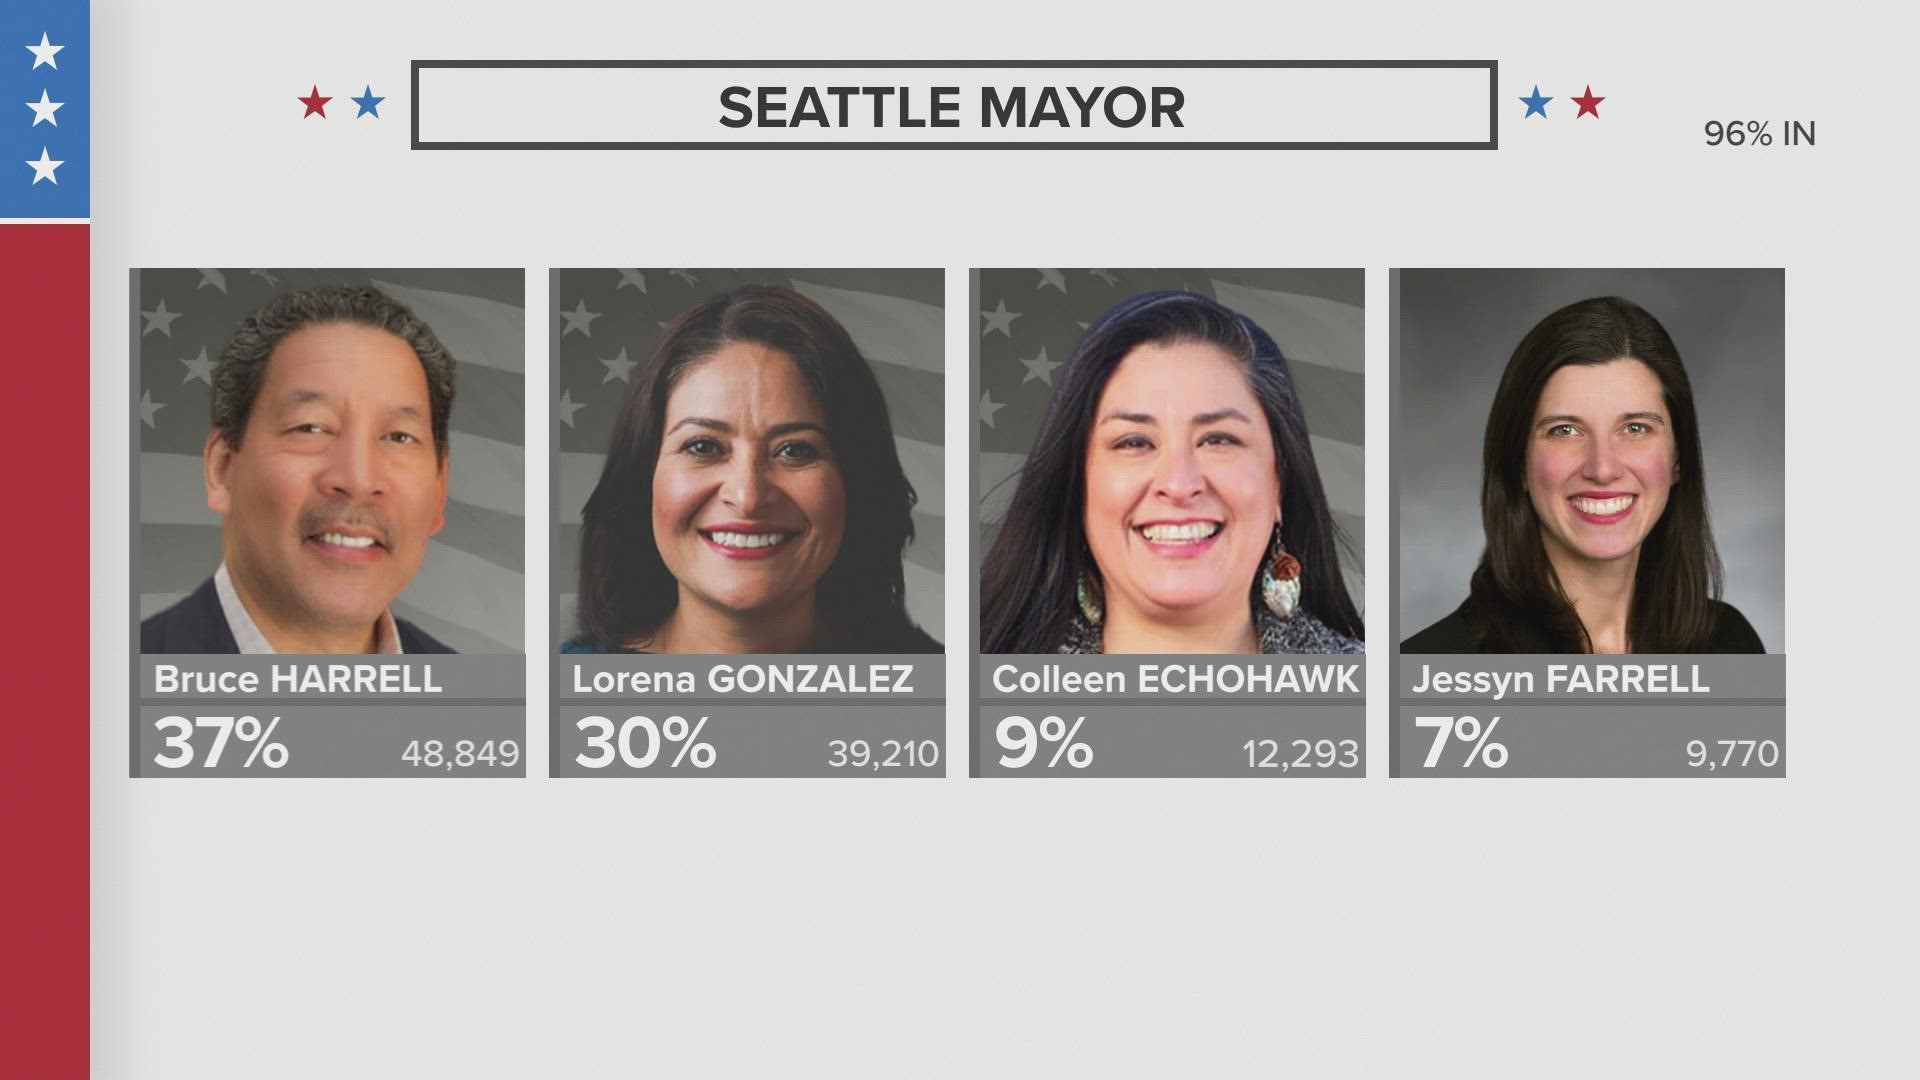 If positions hold, González will face off against former Seattle City Councilmember Bruce Harrell who leads in first place.